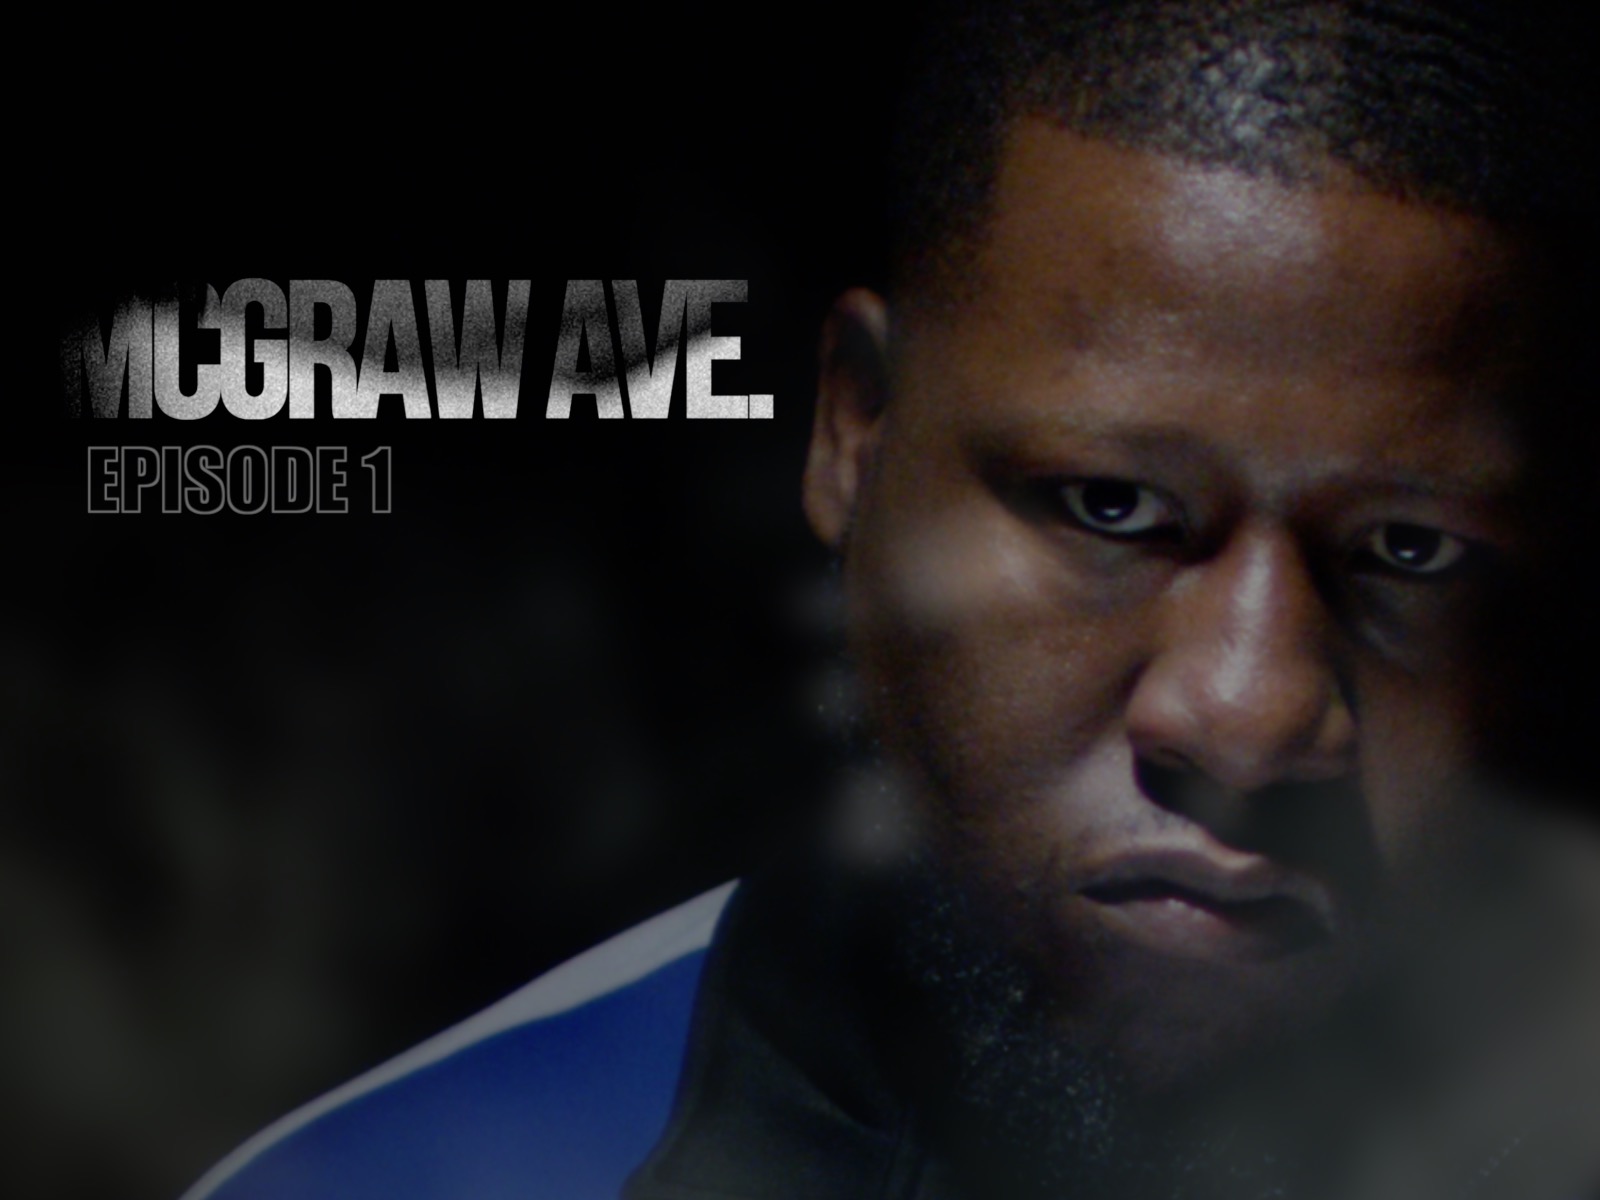 New Twists Ahead 'McGraw Ave' Season 3 Rumors and Cast Reveals Everyone's Talking About